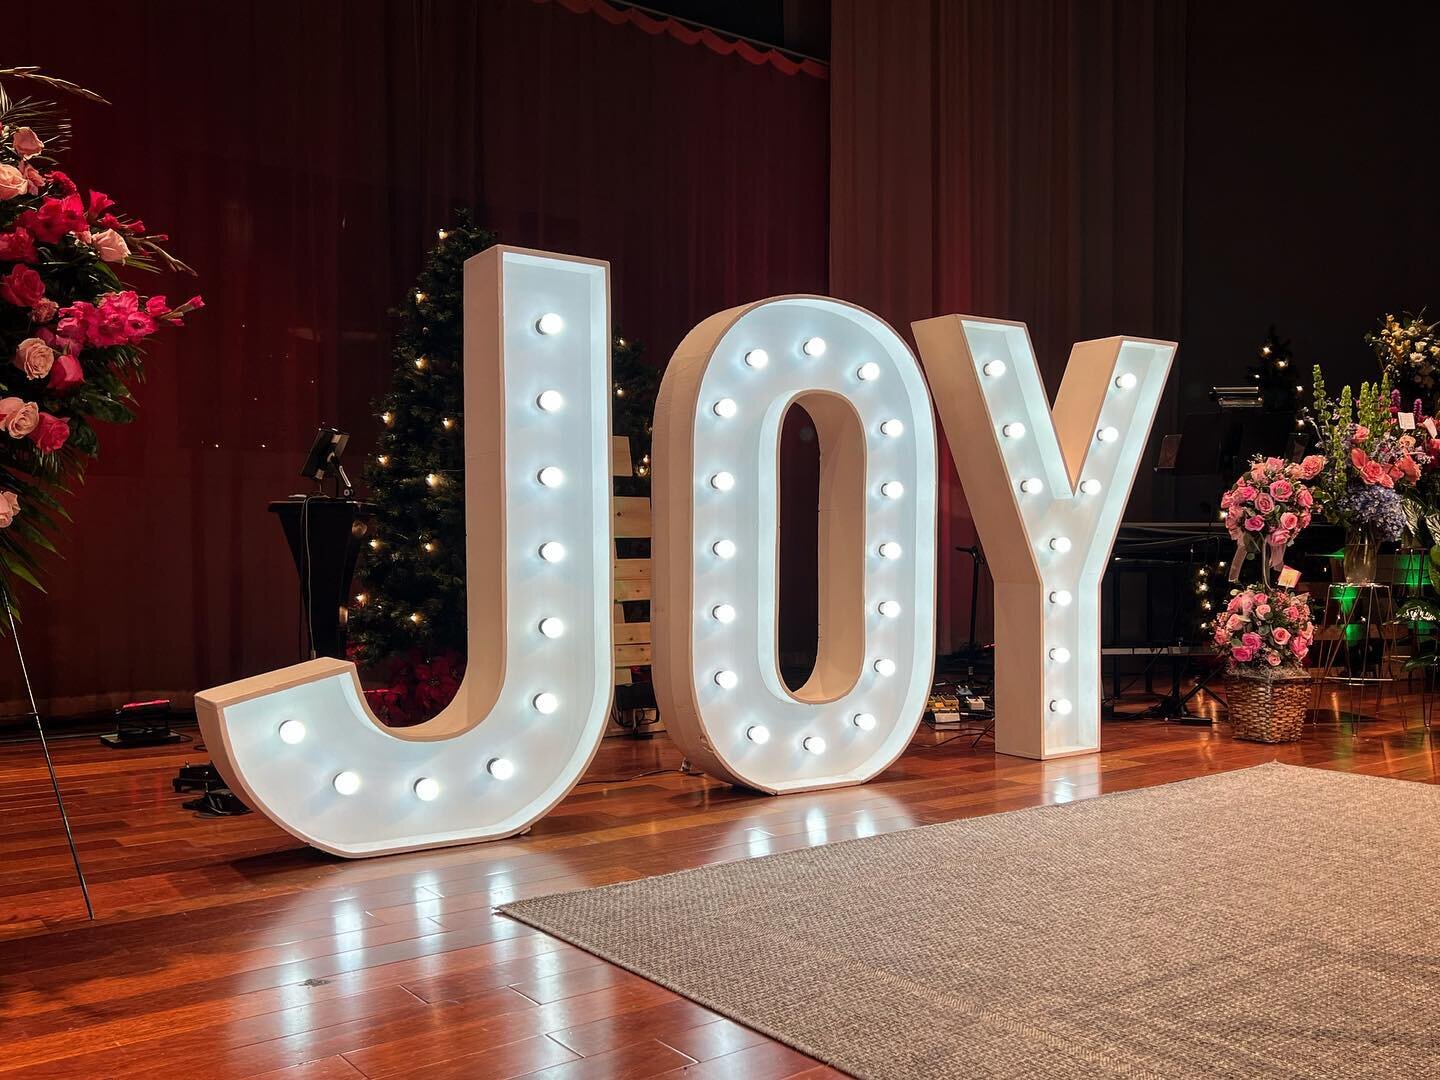 Today was a special day. We had the opportunity to provide letters for a past client of ours with the words &ldquo;JOY&rdquo; at his sister&rsquo;s funeral. This moved me! What an impact this made to help sum up her life. 

This touched me so much th